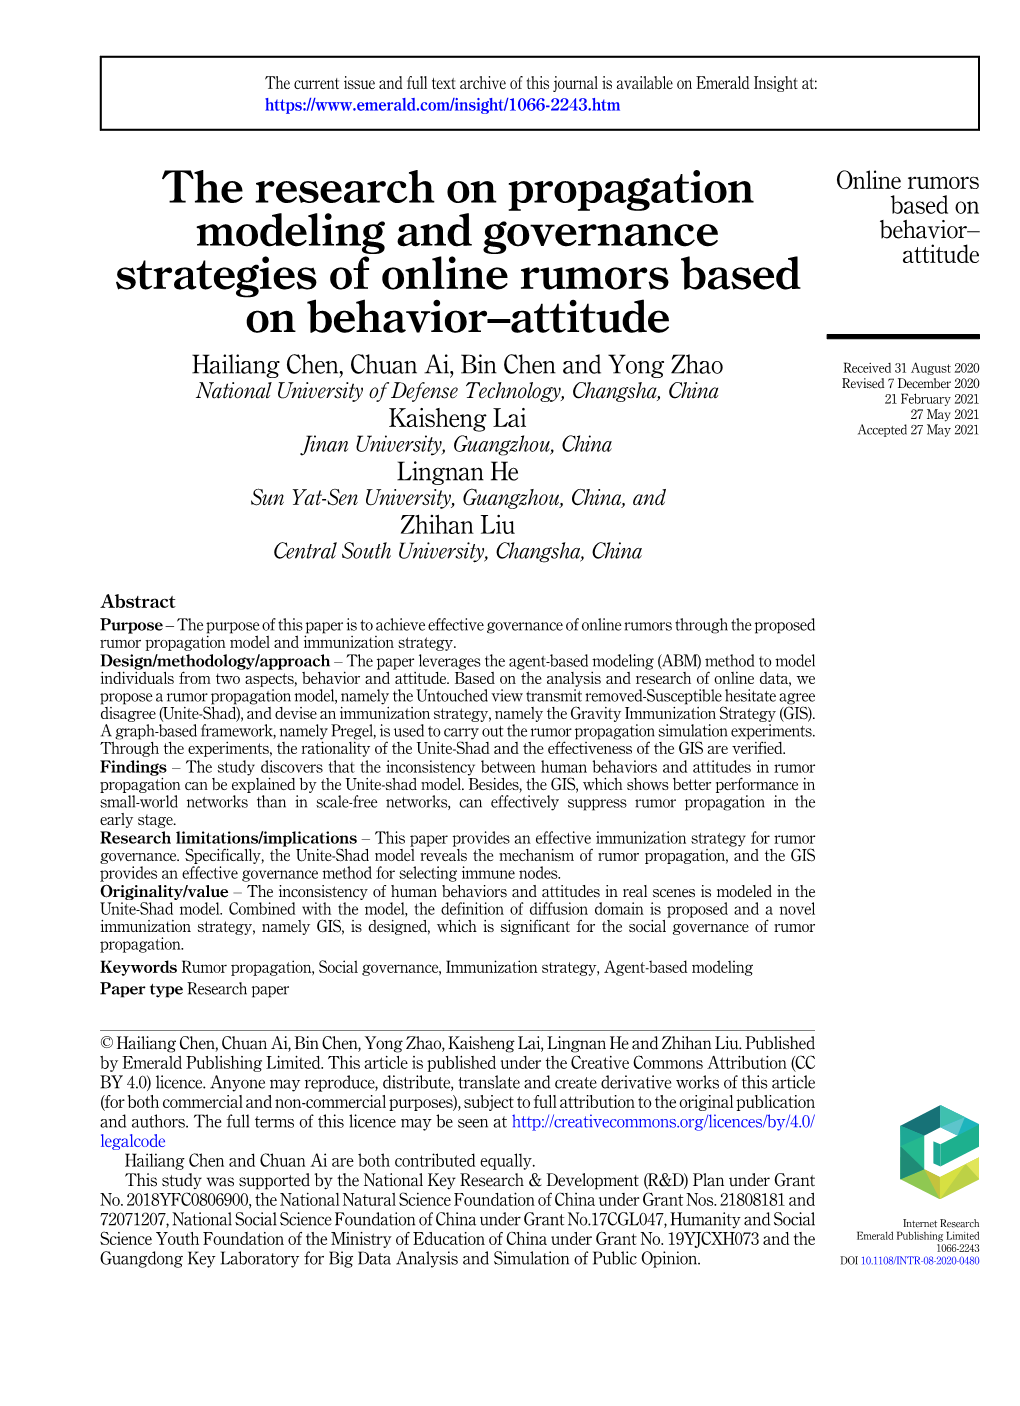 The Research on Propagation Modeling and Governance Strategies of Online Rumors Based on Behavior–Attitude